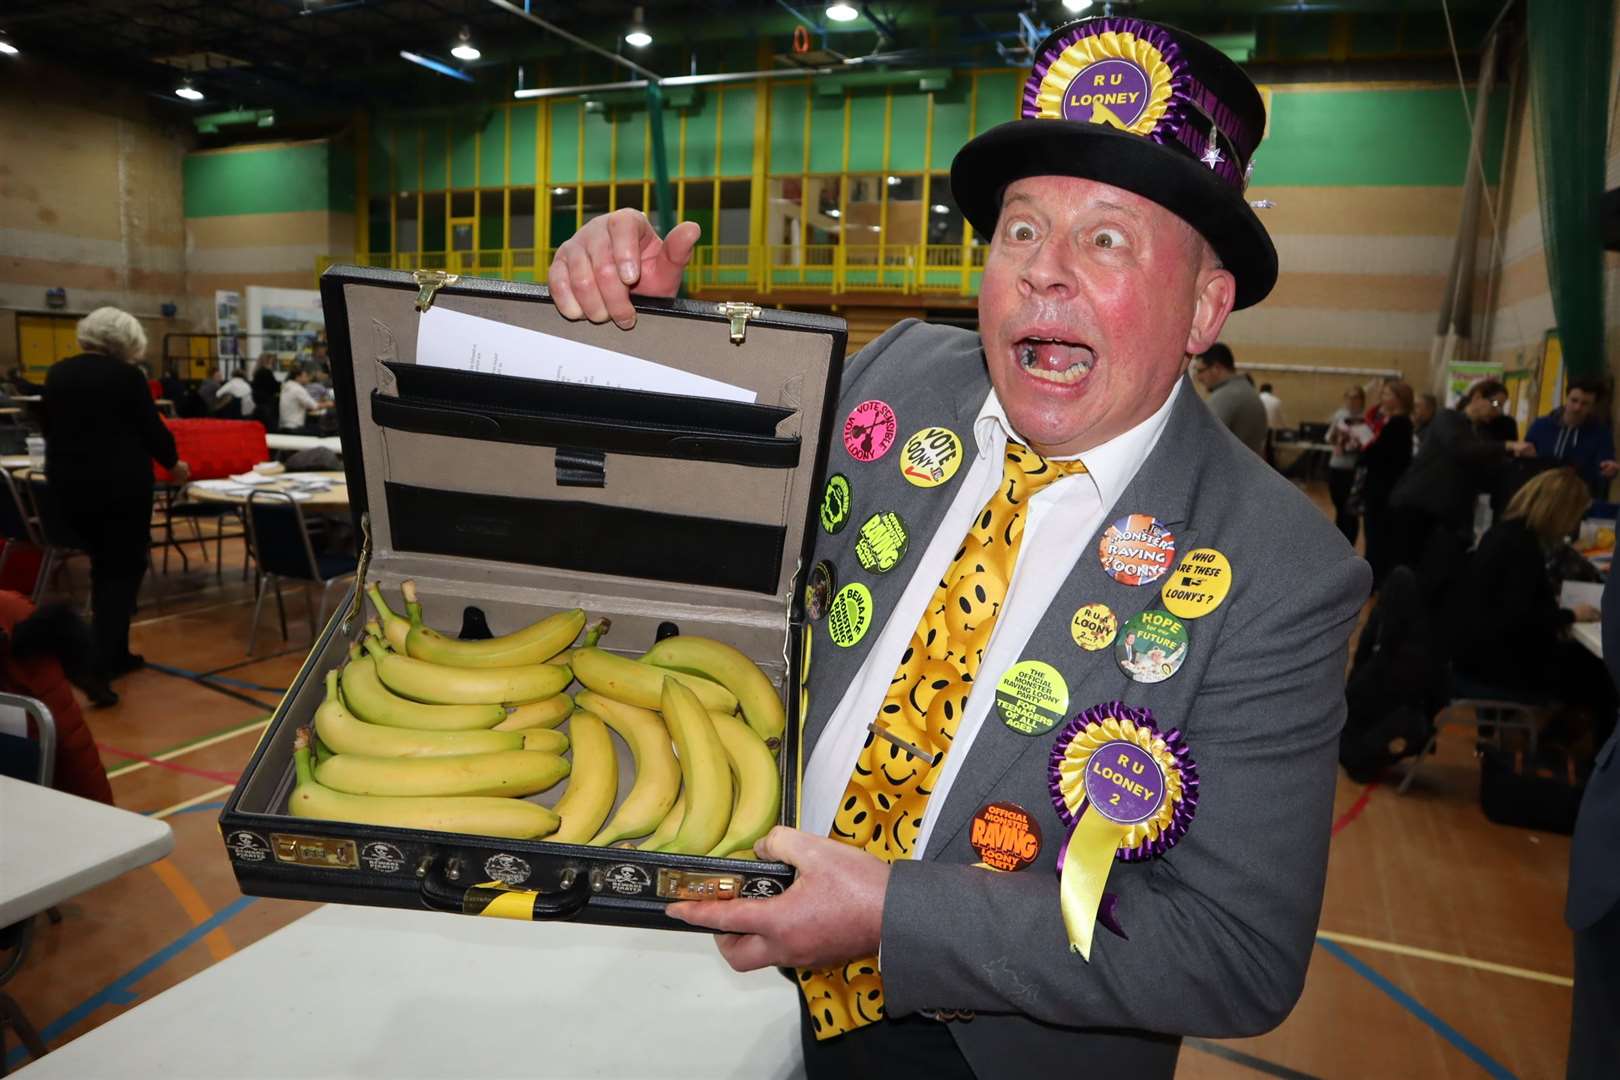 Mad Mike Young of the Monster Raving Loony Park and his case of bananas